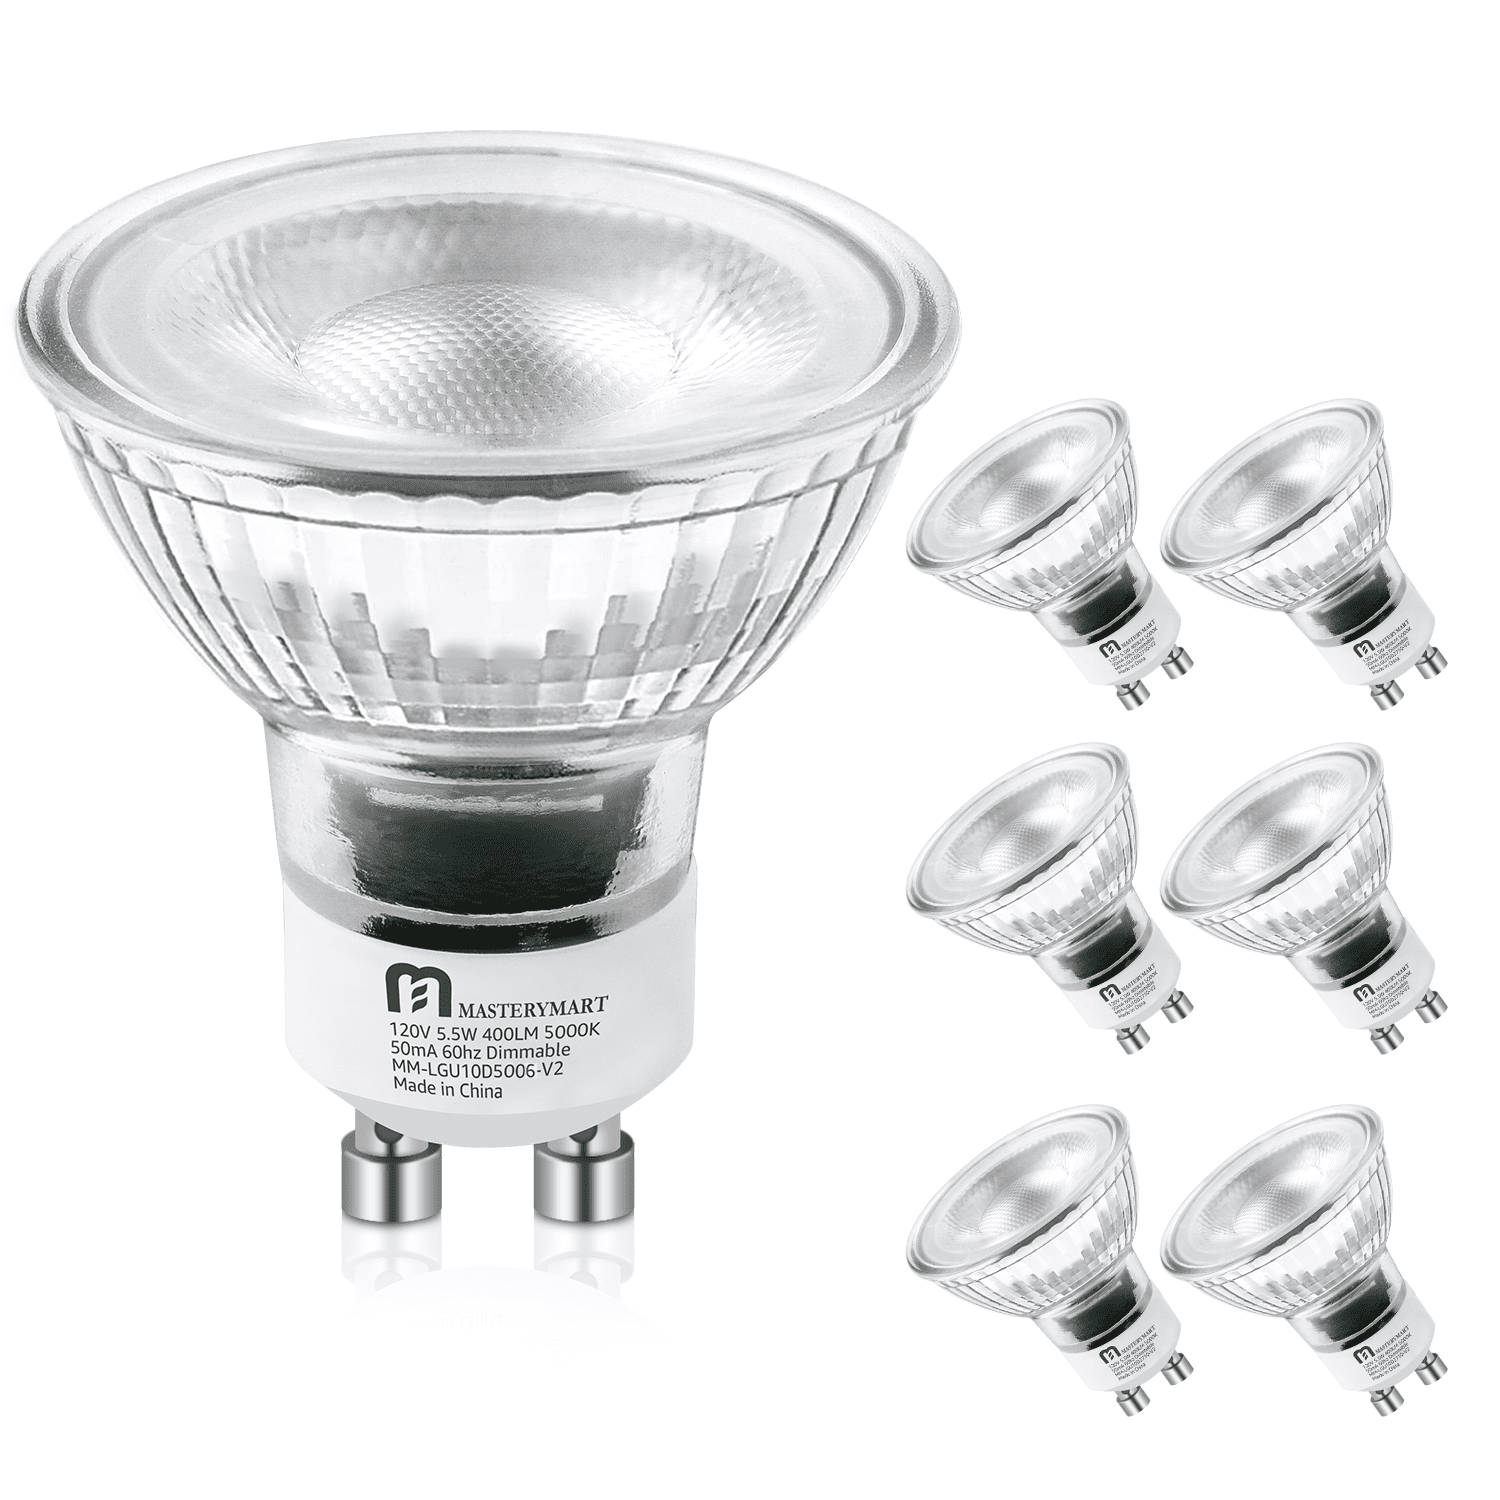 GU10 Bulbs, LED 50W Mart White, Soft Dimmable Equivalent, Lasts Mastery 400LM, 2700K 25,000hrs, 6-pack Light